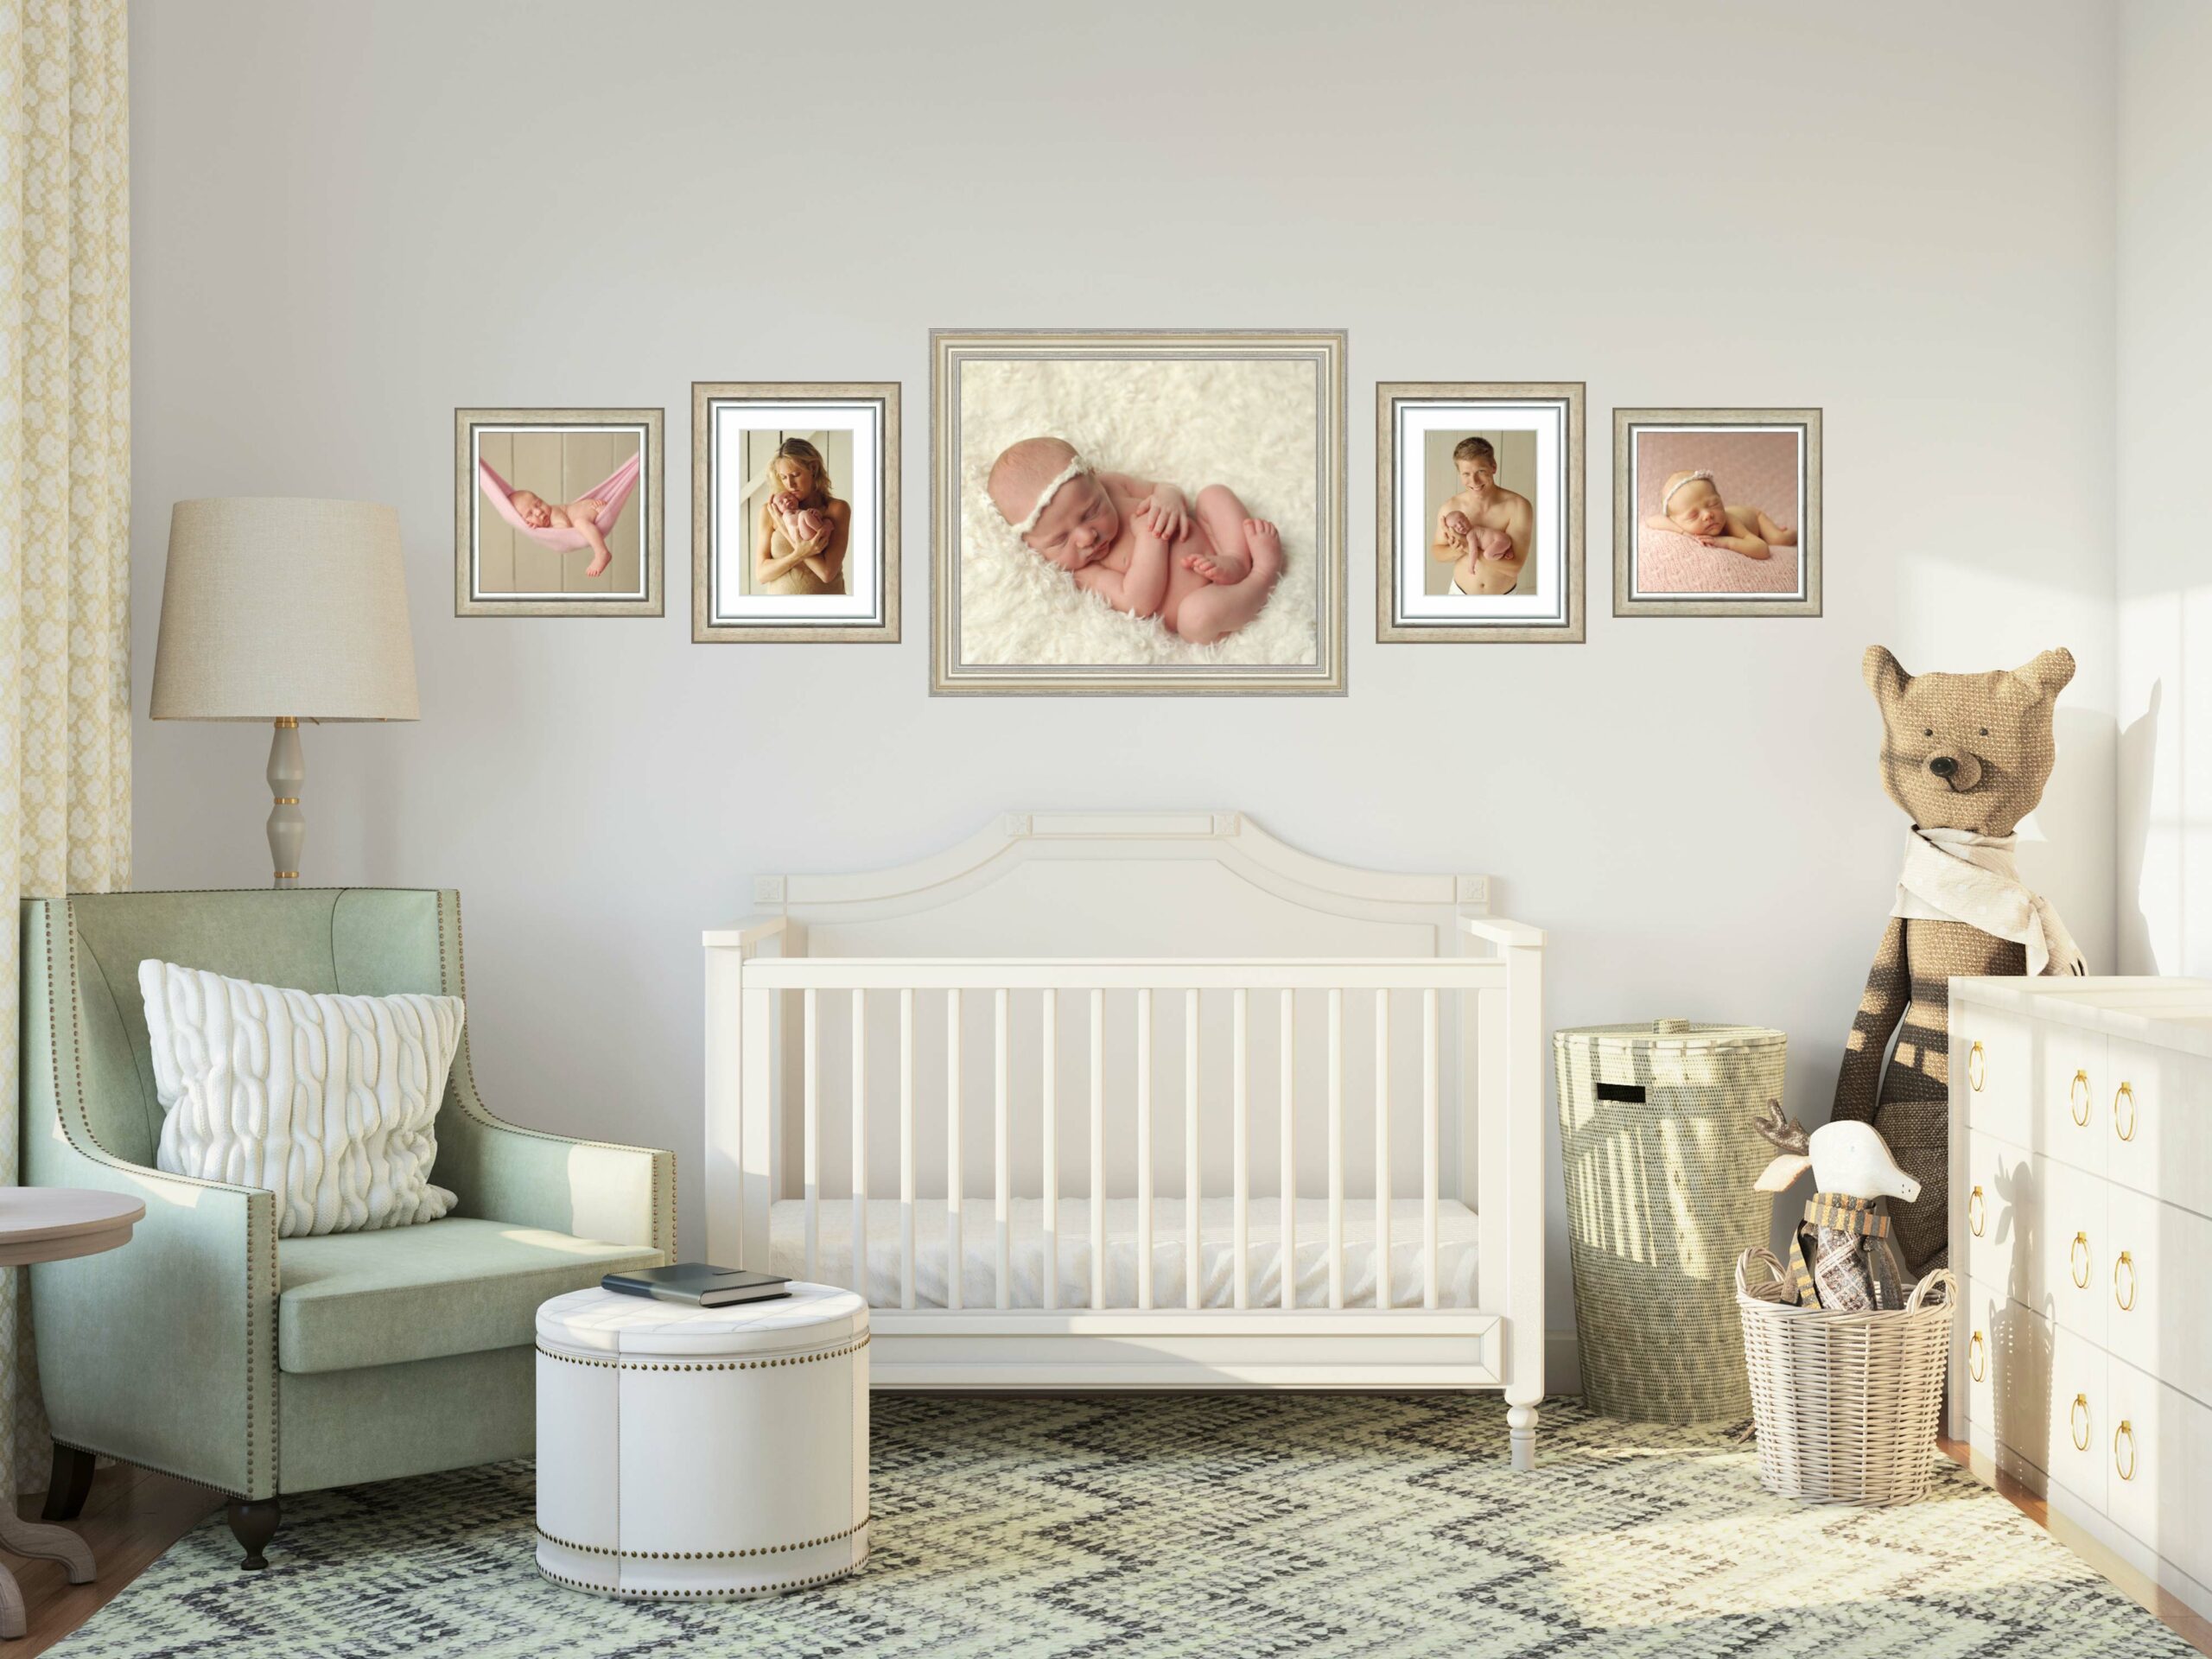 picture of a baby nursery with images of newborn